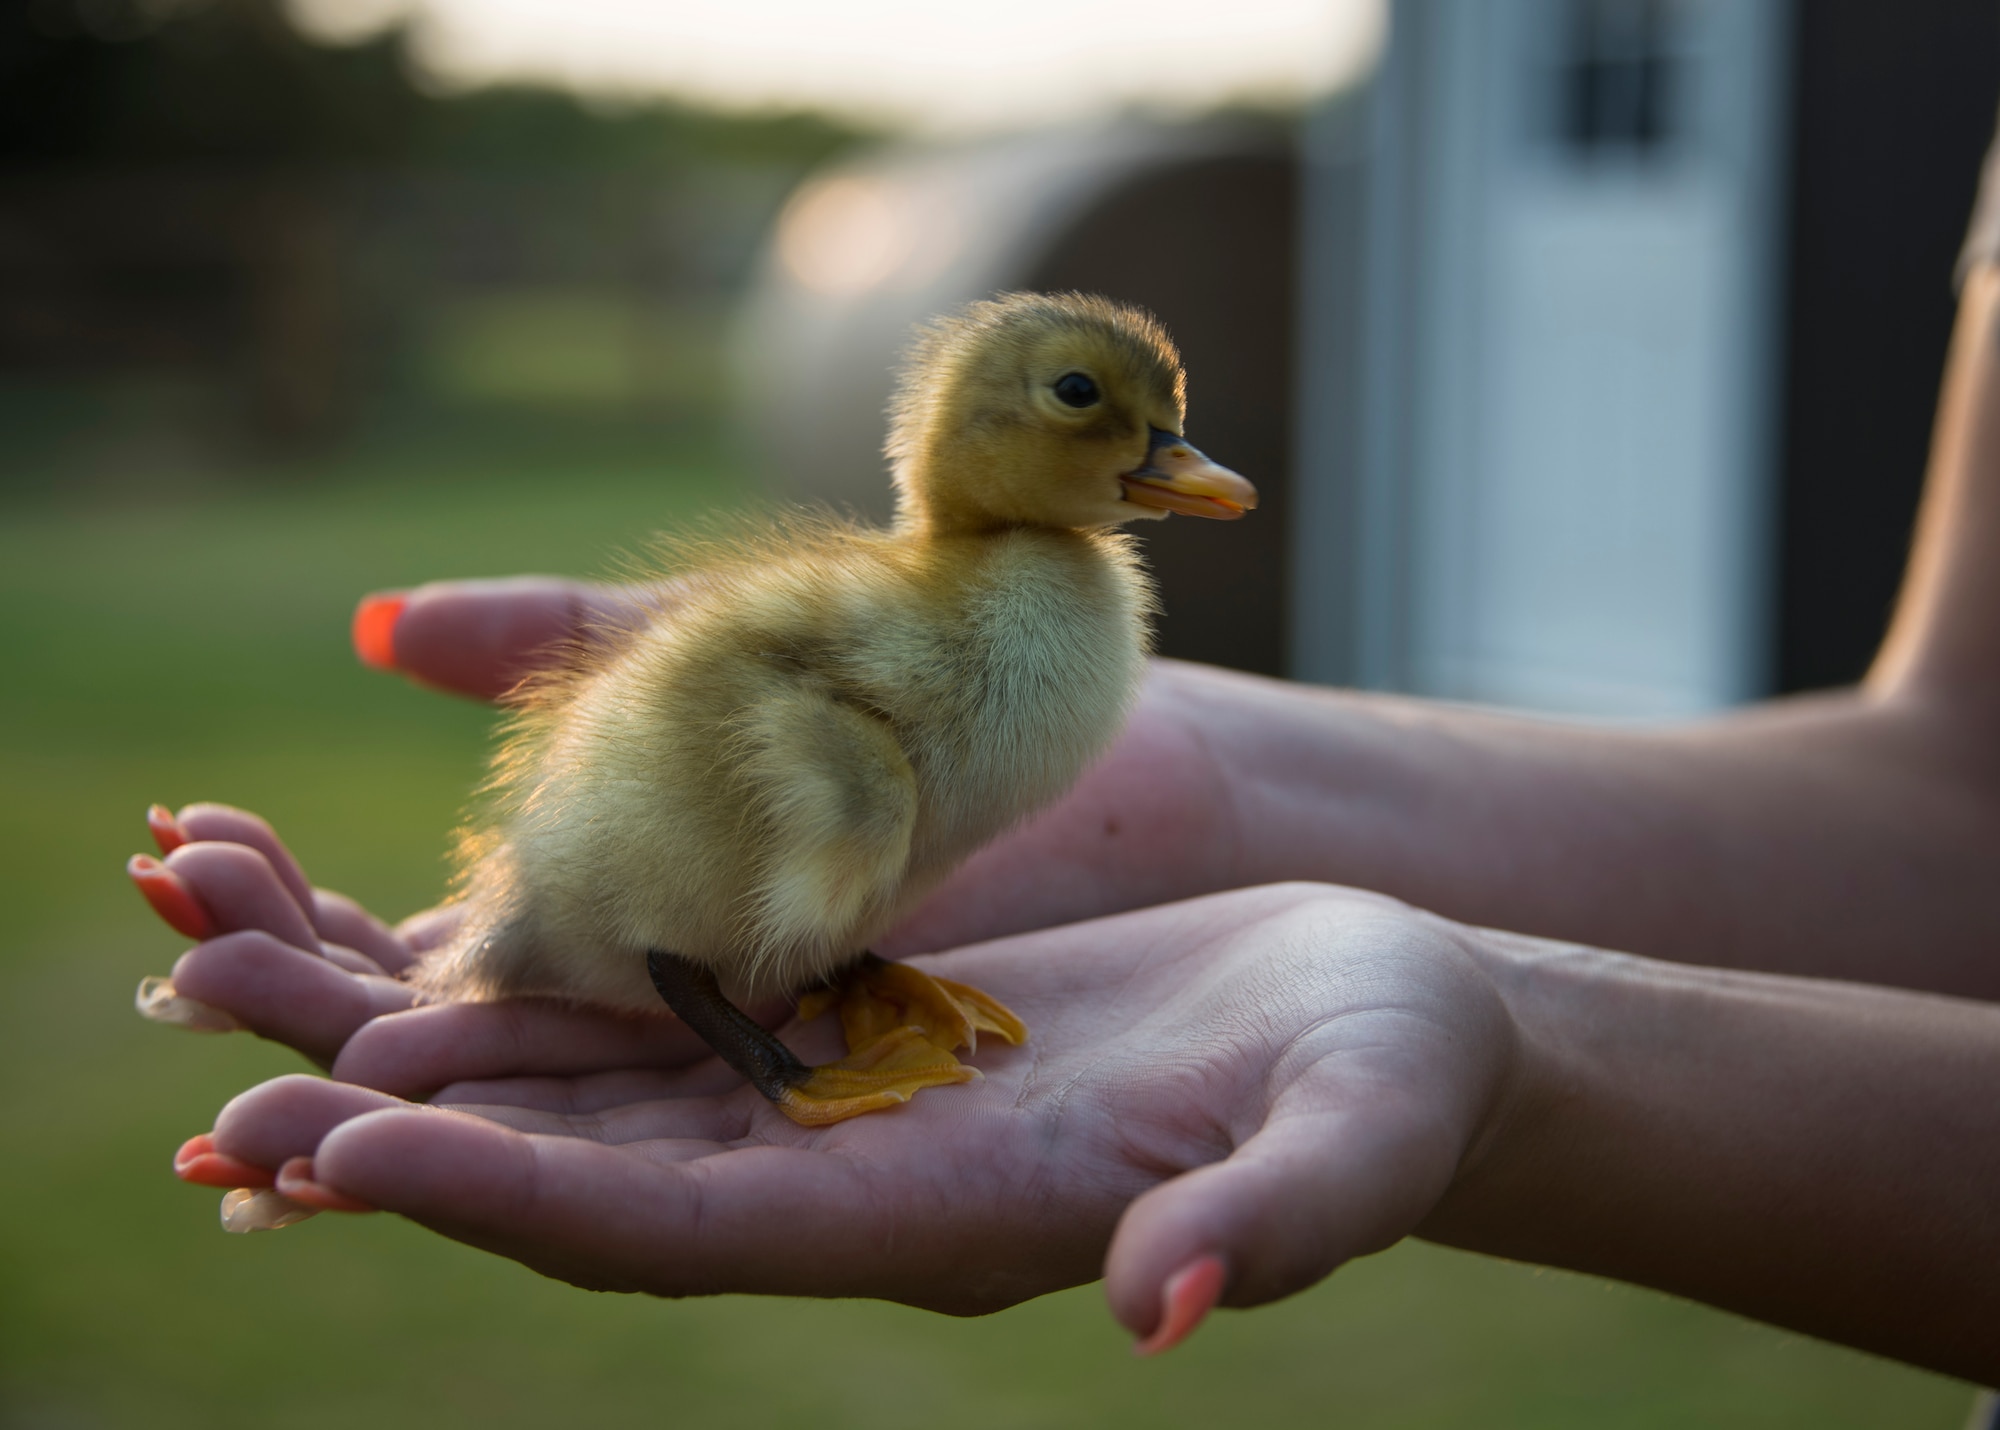 Dominique Kessler, daughter of U.S. Air Force Master Sgt. Thomas Kessler, 97th Logistics Readiness Squadron Vehicle Management Flight superintendent, holds a duckling on 1AB Ranch in Altus, Oklahoma, Aug. 5, 2021. The duckling hatched at the beginning of August 2021. (U.S. Air Force photo by Senior Airman Amanda Lovelace)